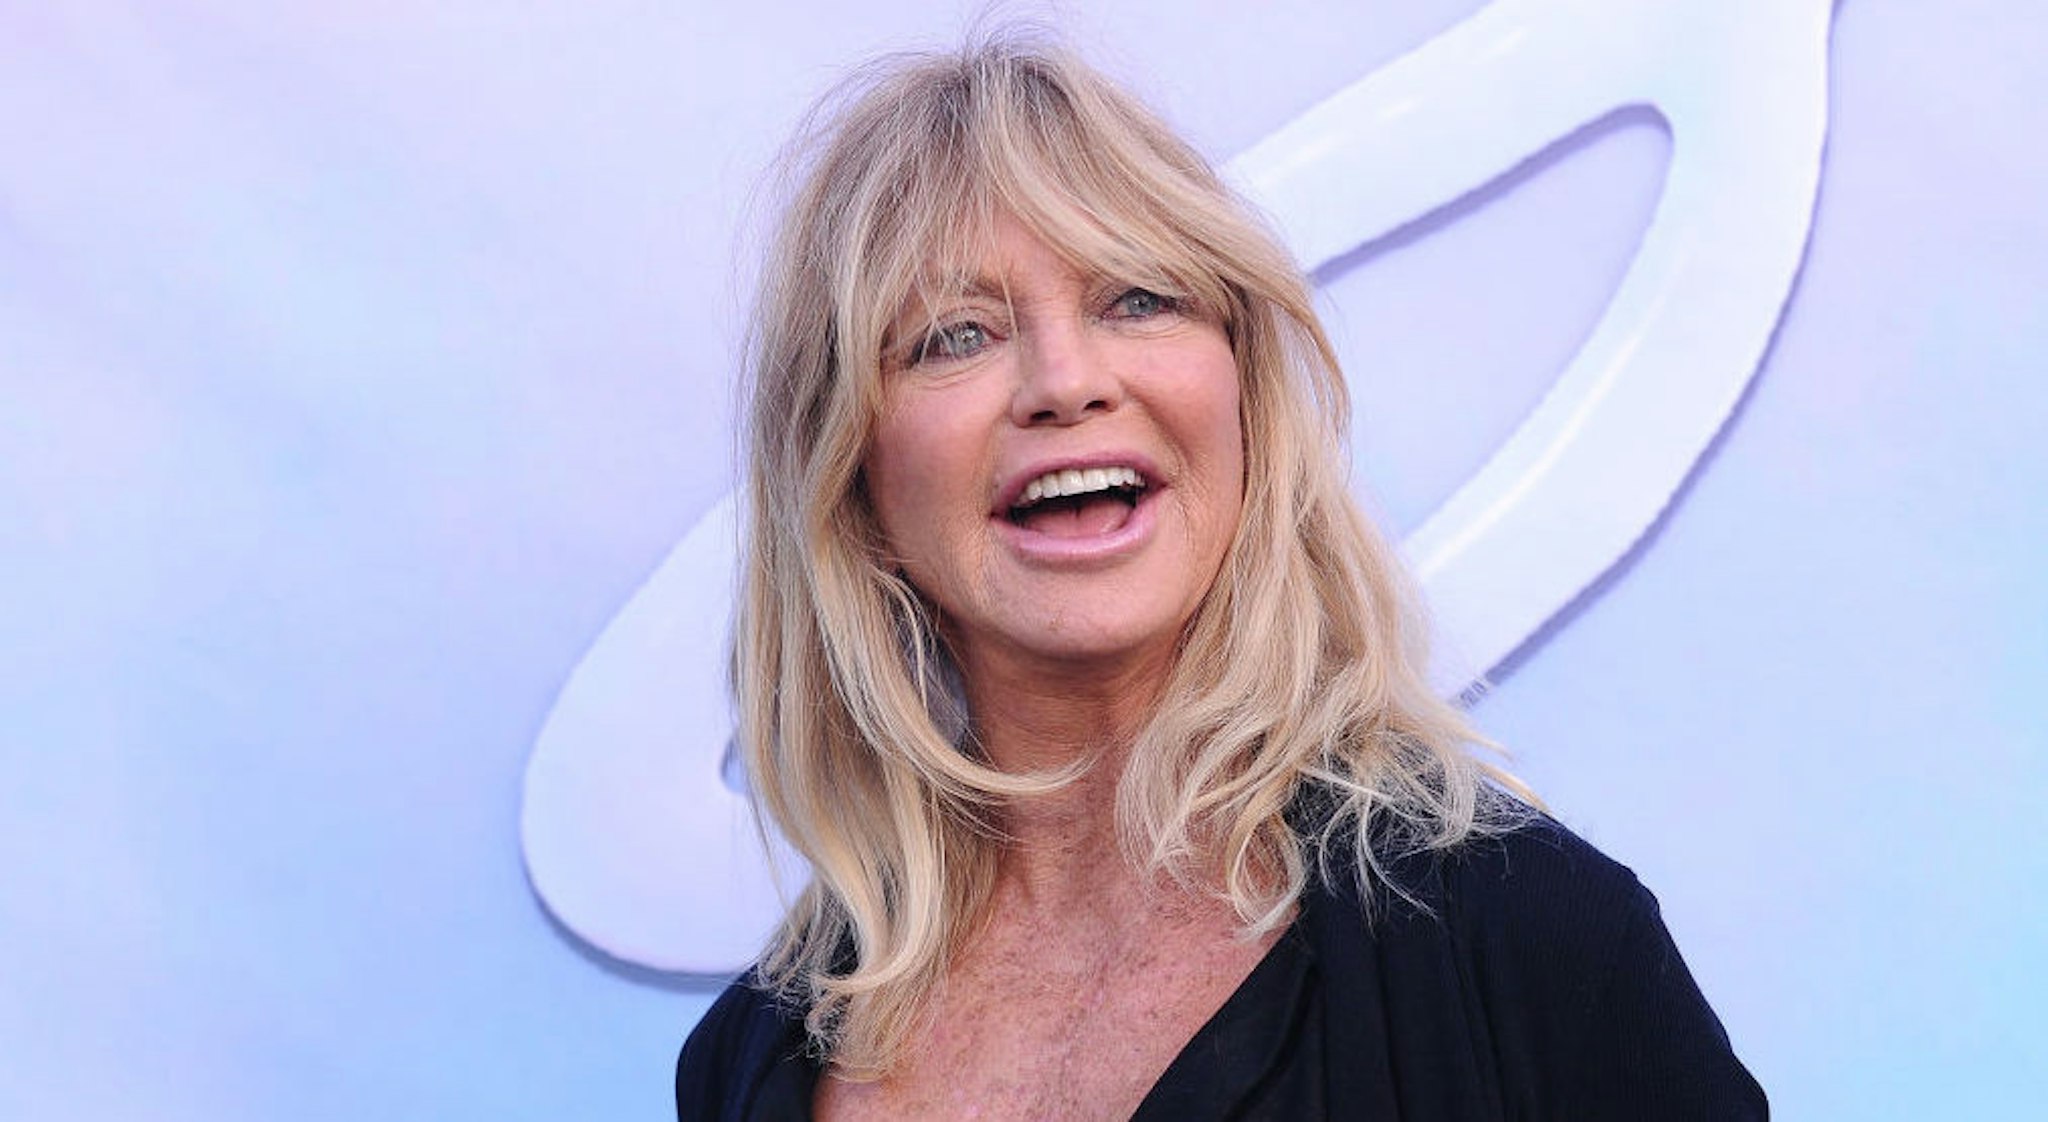 Goldie Hawn Talks Staying Out Of Politics: 'I Stay In My Lane,' We Should  Entertain 'For All People' | The Daily Wire